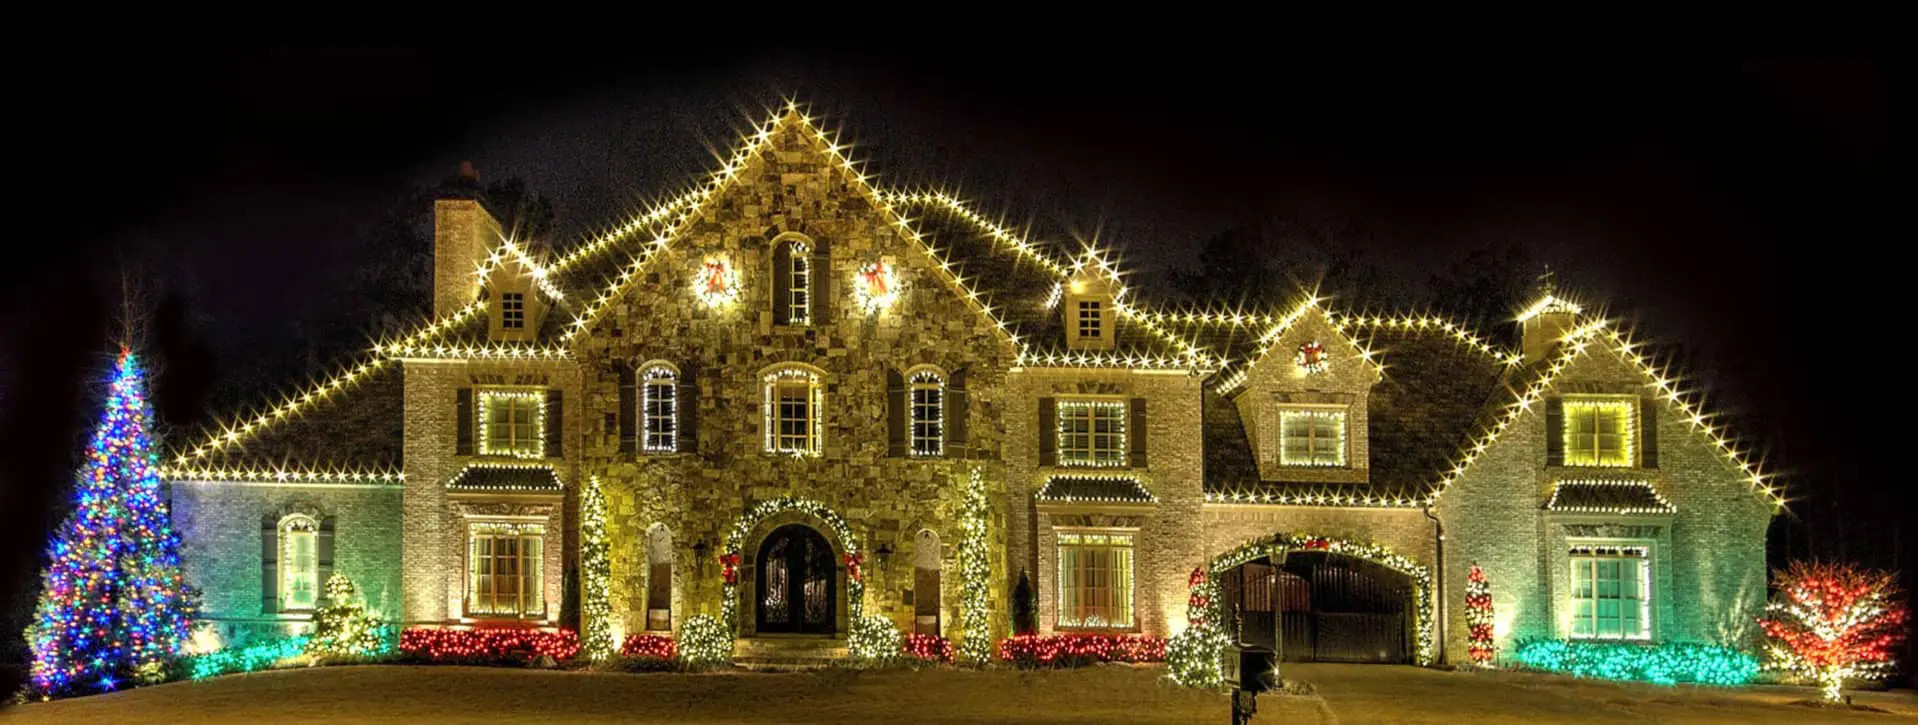 holiday-lighting-showcase-services-header